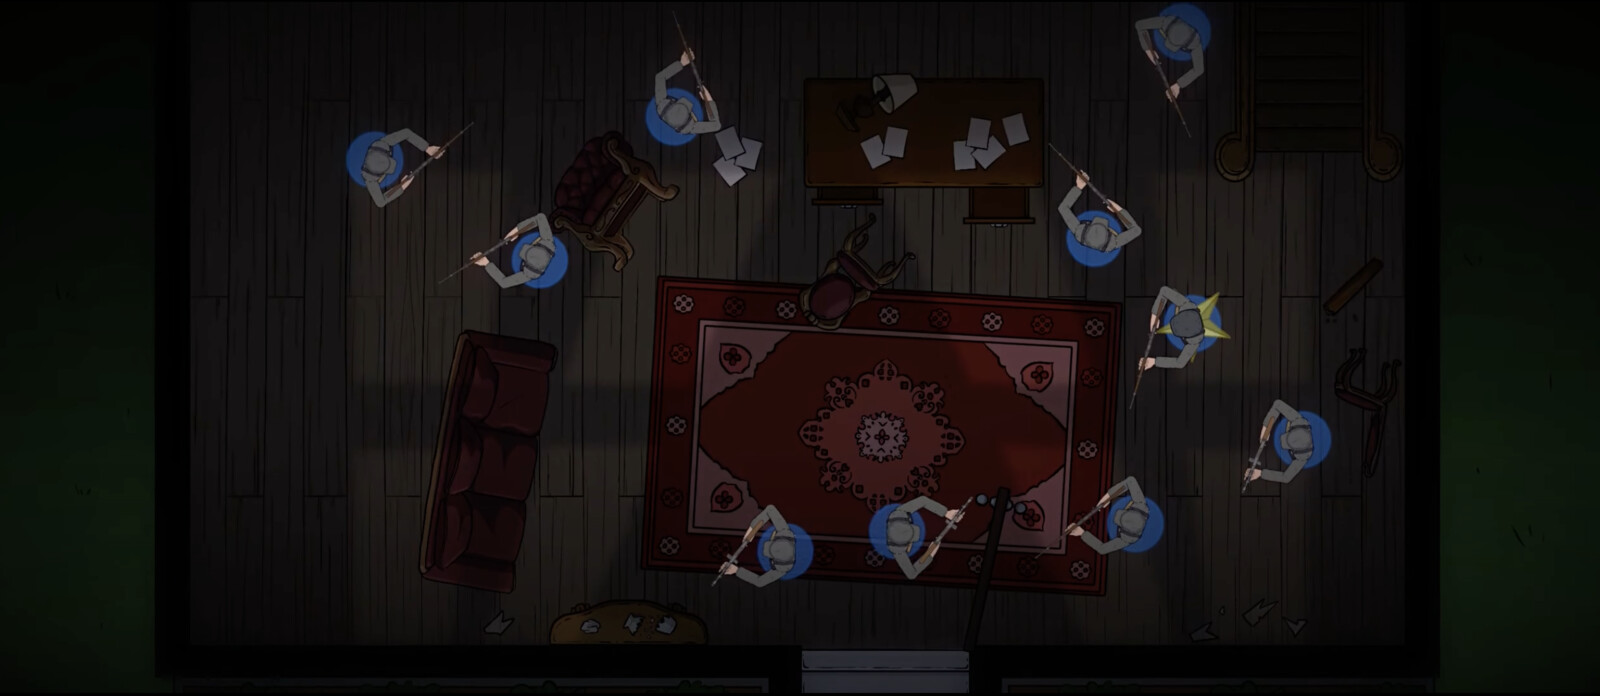 Screenshot from Final - Art by the Illustration and Animation Teams